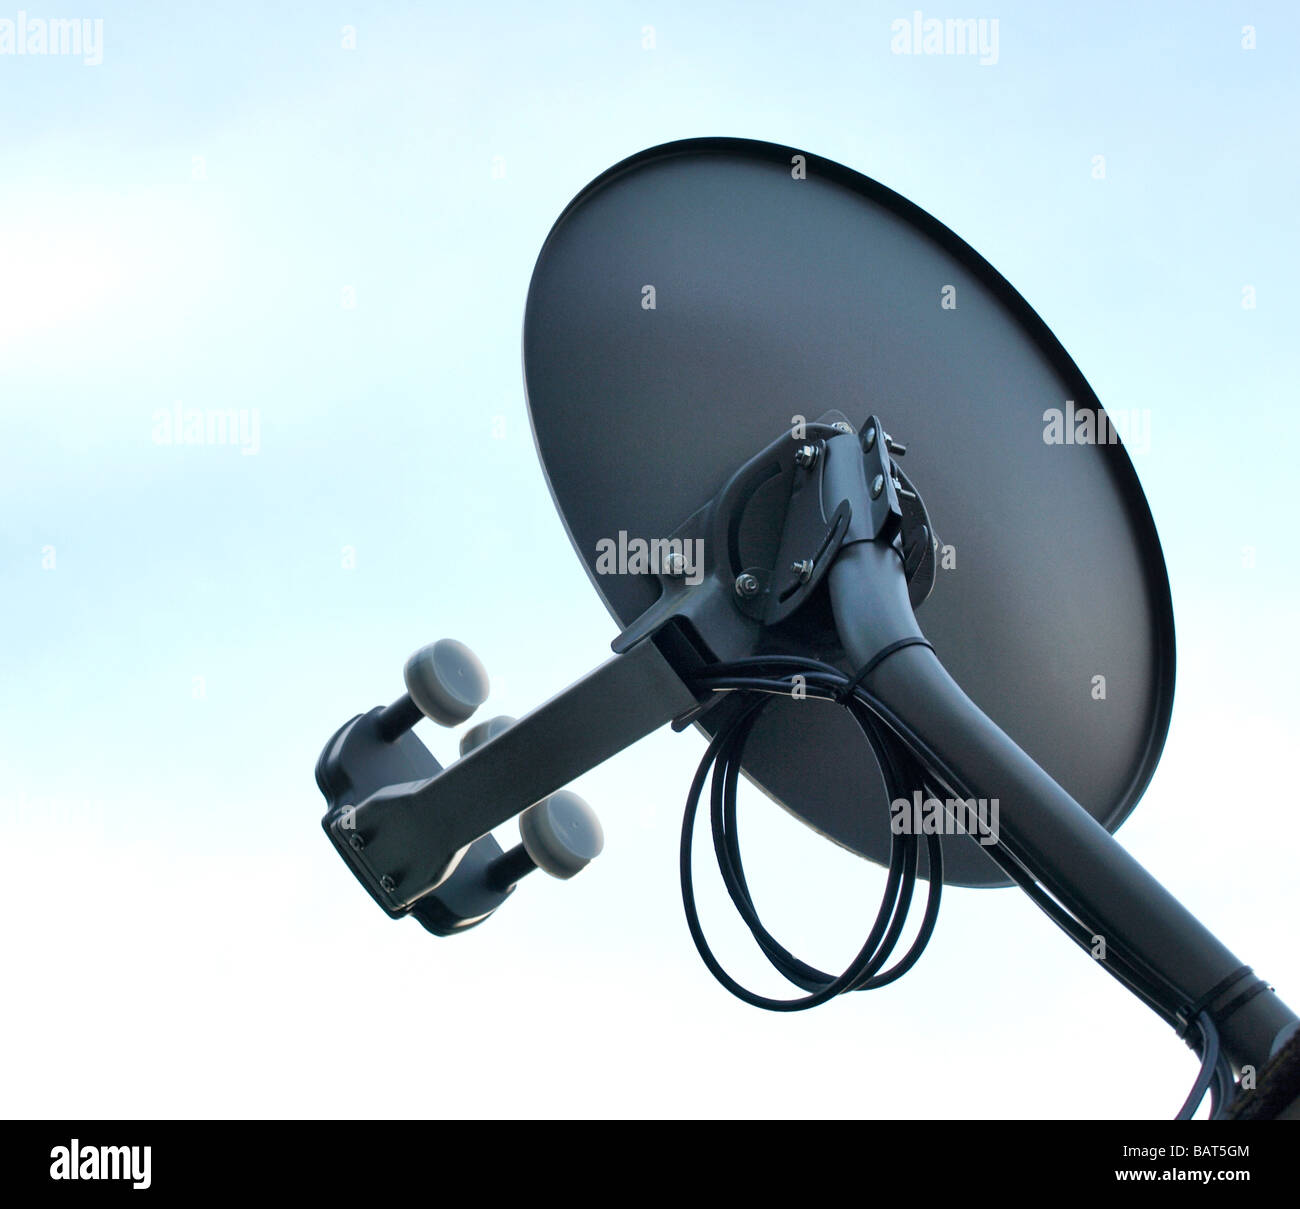 satellite television tv receiver dish in gray against a light blue sky showing arm dish cables Stock Photo